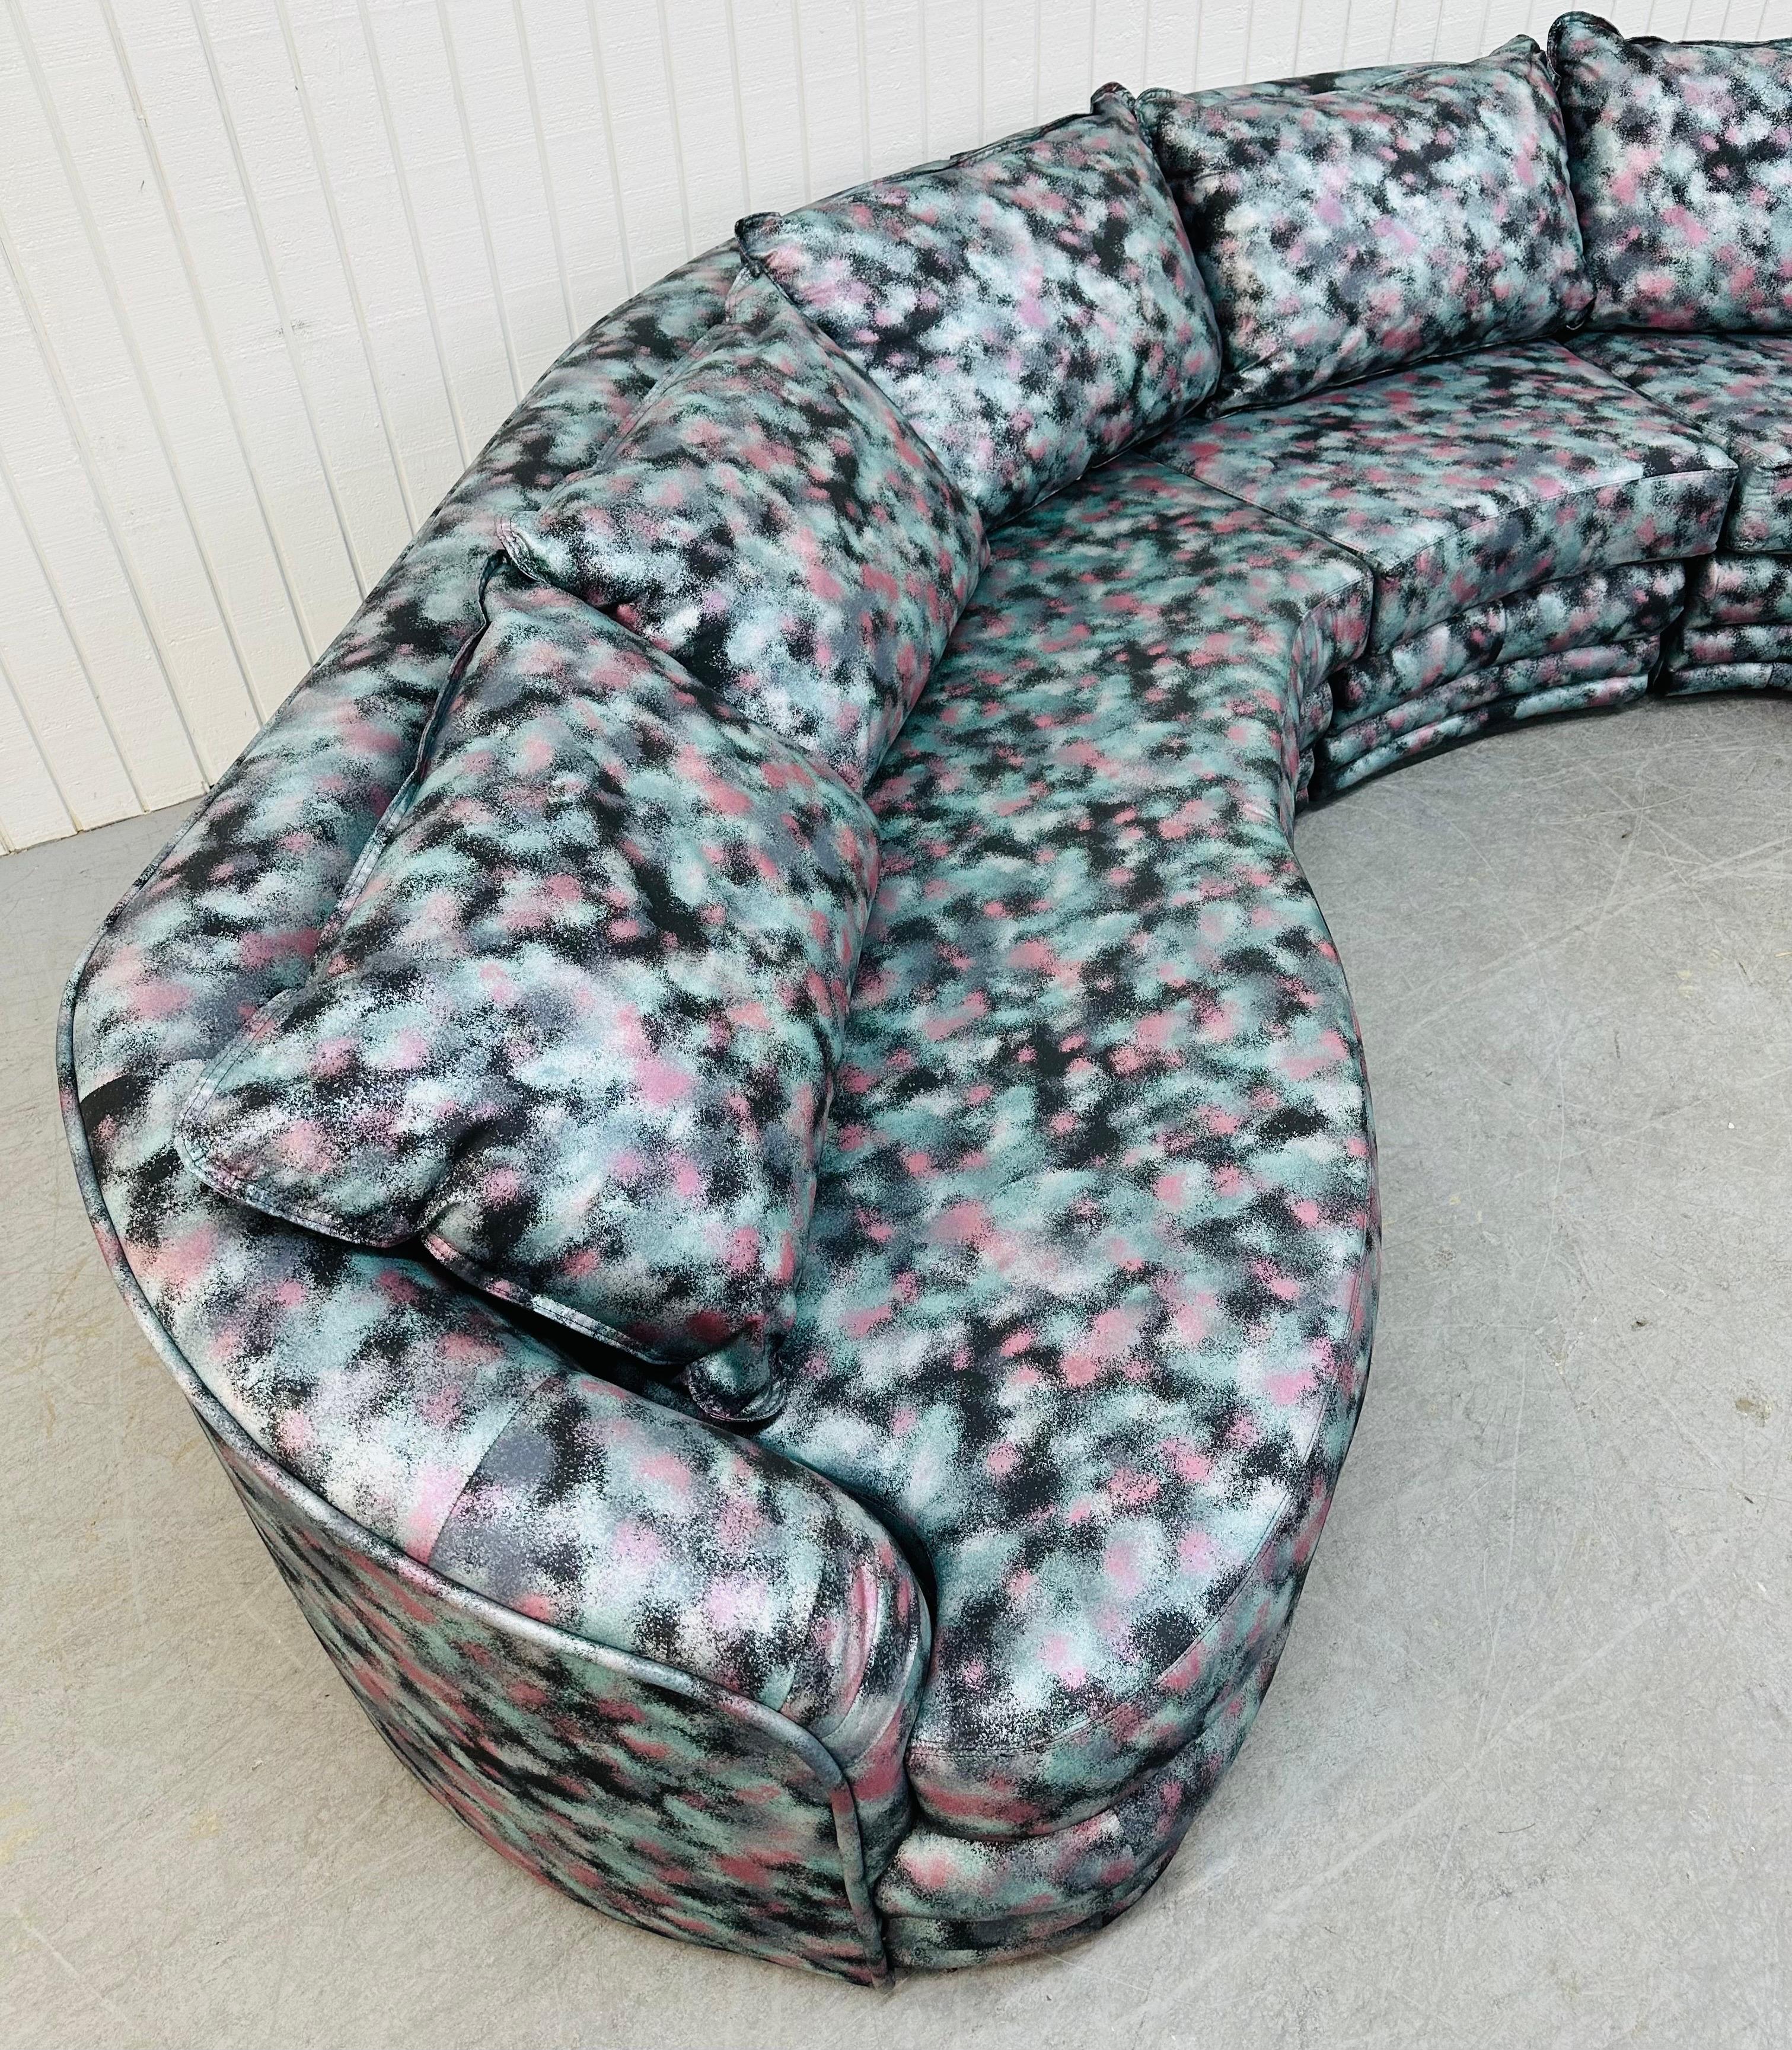 This listing is for a Post-Modern 3-Piece Curved Sectional Cloud Sofa. Featuring three pieces that come together to make a large curved sofa, cloud style design, original abstract upholstery, and original pillows. This is an exceptional combination